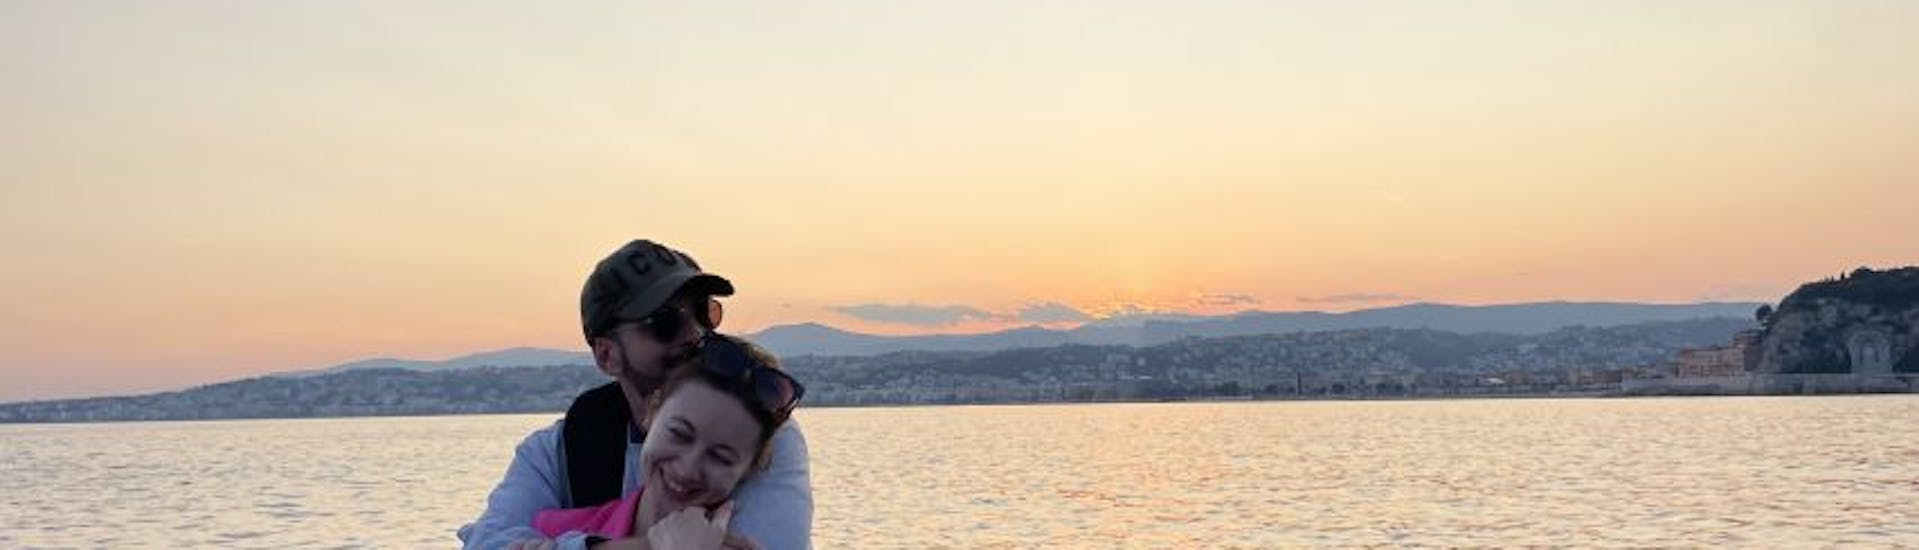 Very romantic couple enjoying the sunset during their Nissa Croisières'Sunset RIB Boat Trip to Saint-Jean-Cap-Ferrat and Villefranche-sur-Mer from Nice with Apéritif.